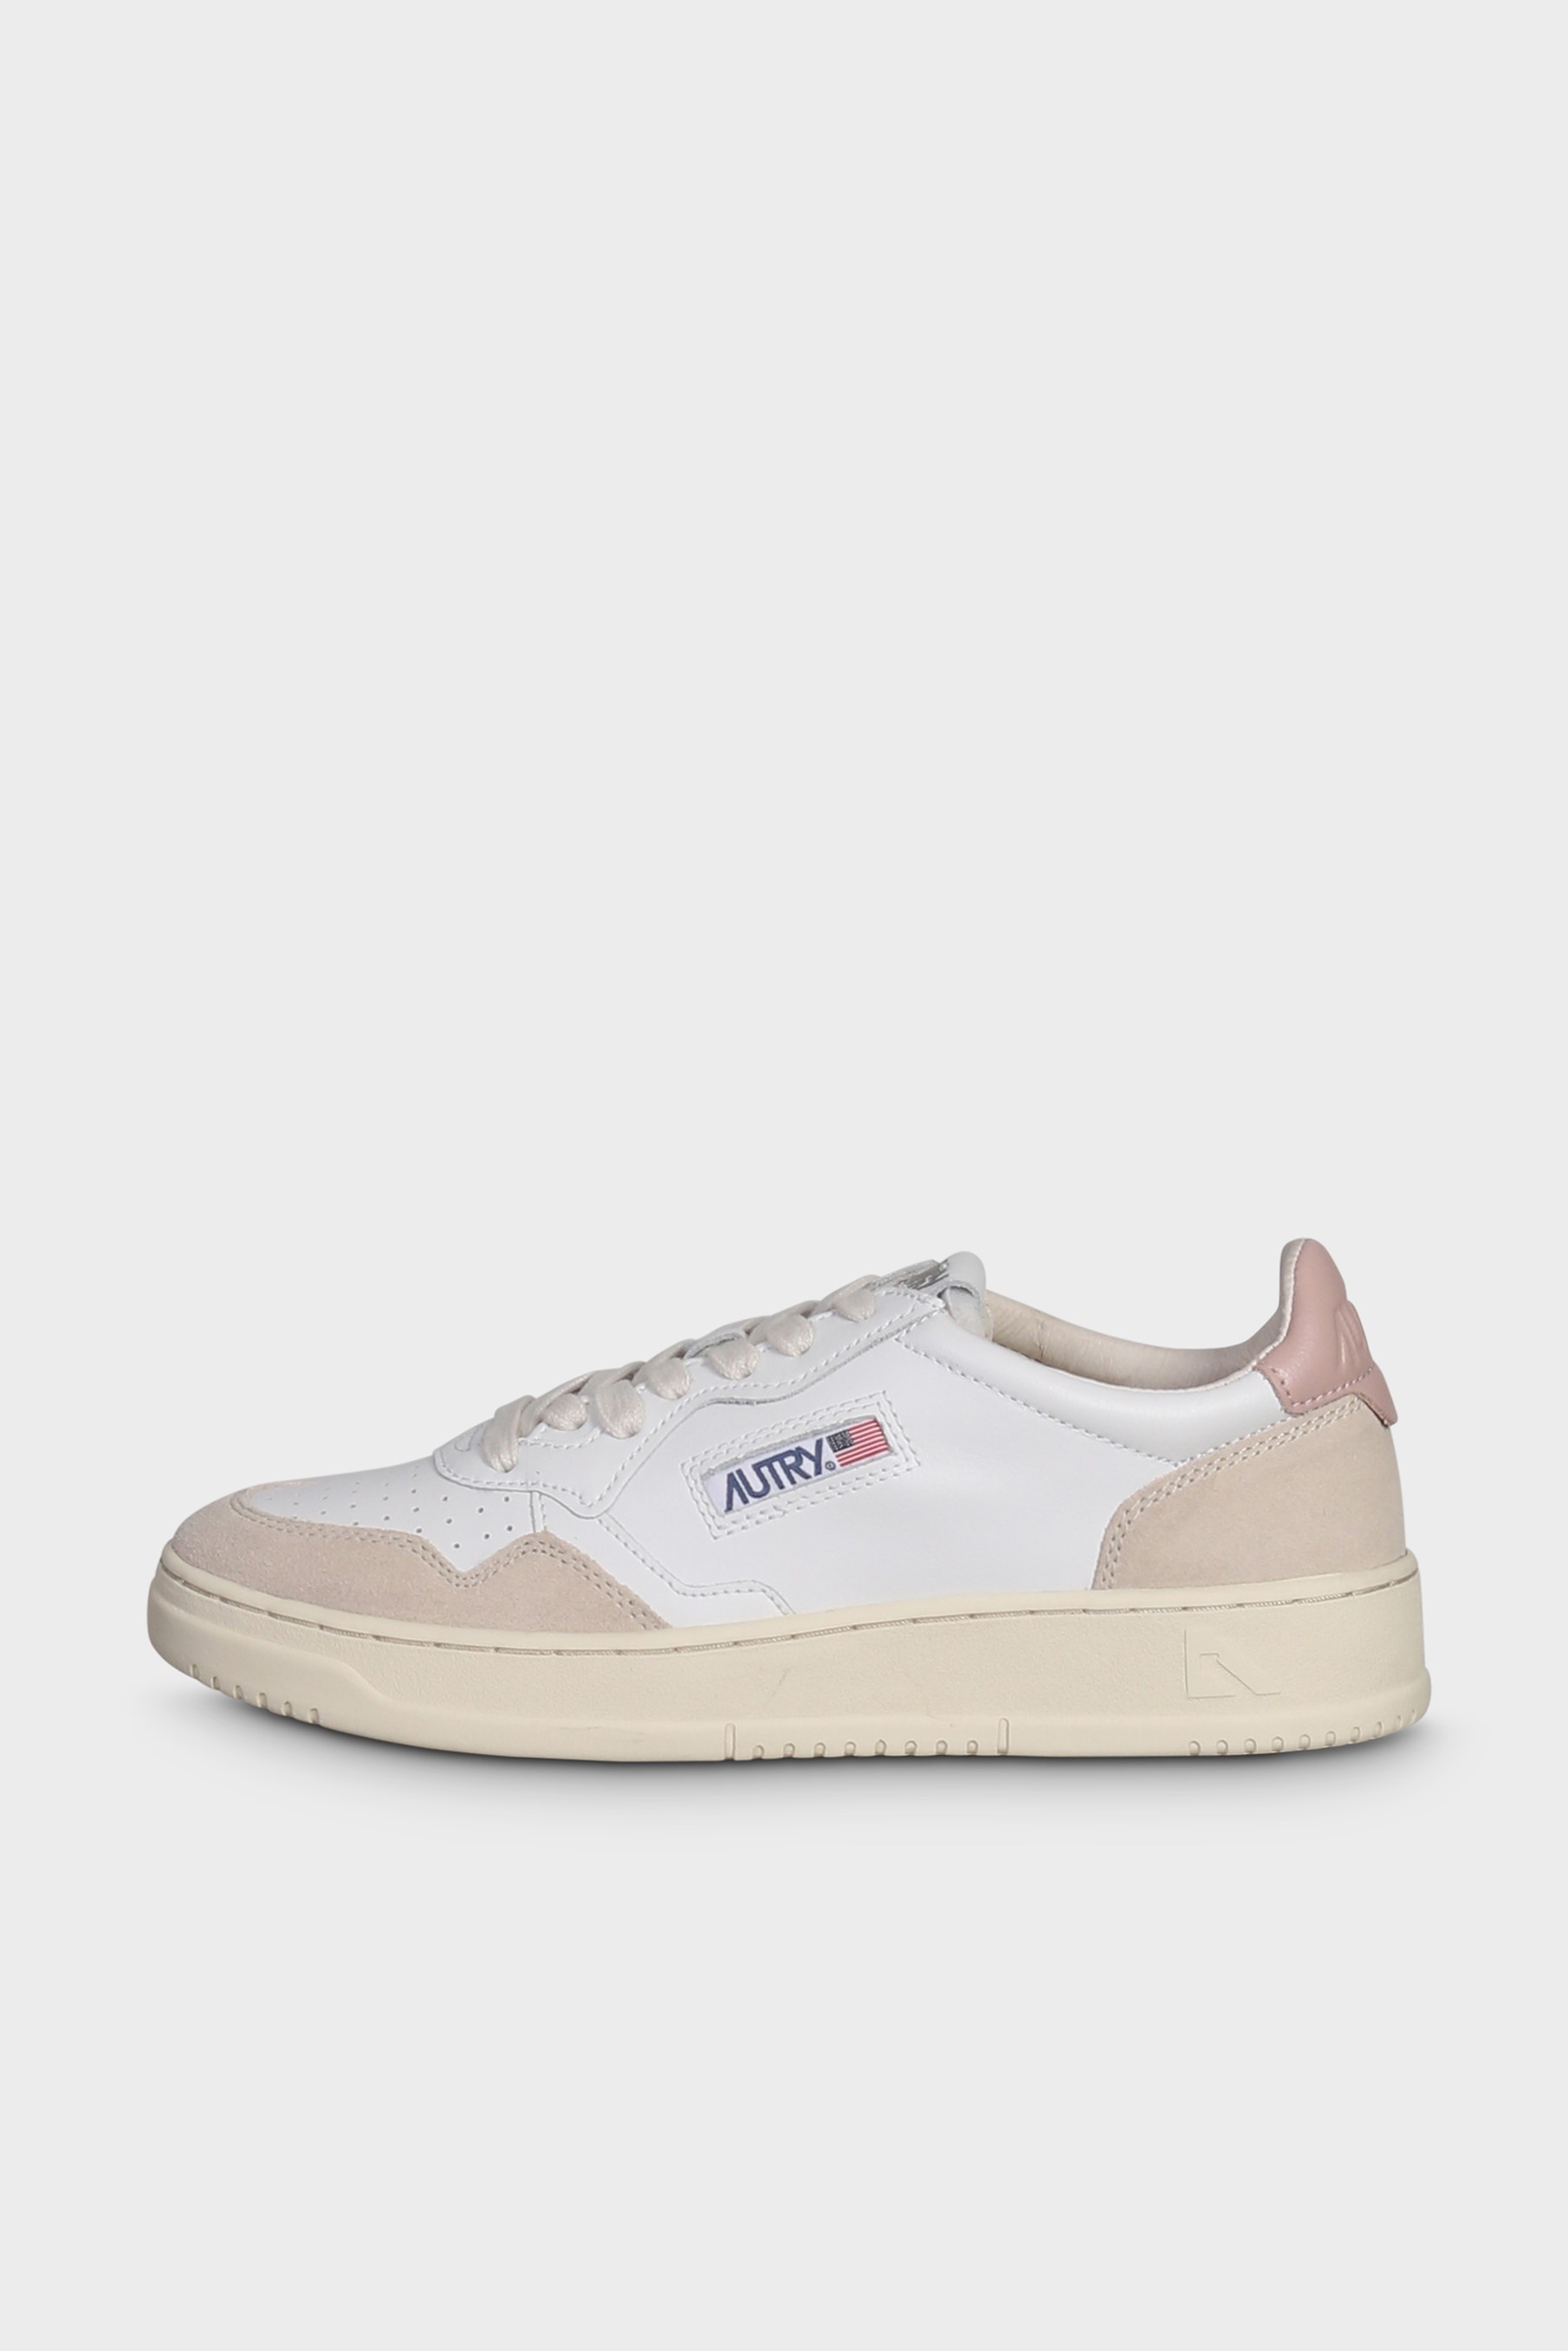 AUTRY ACTION SHOES Medalist Low Sneaker Suede White/Pow